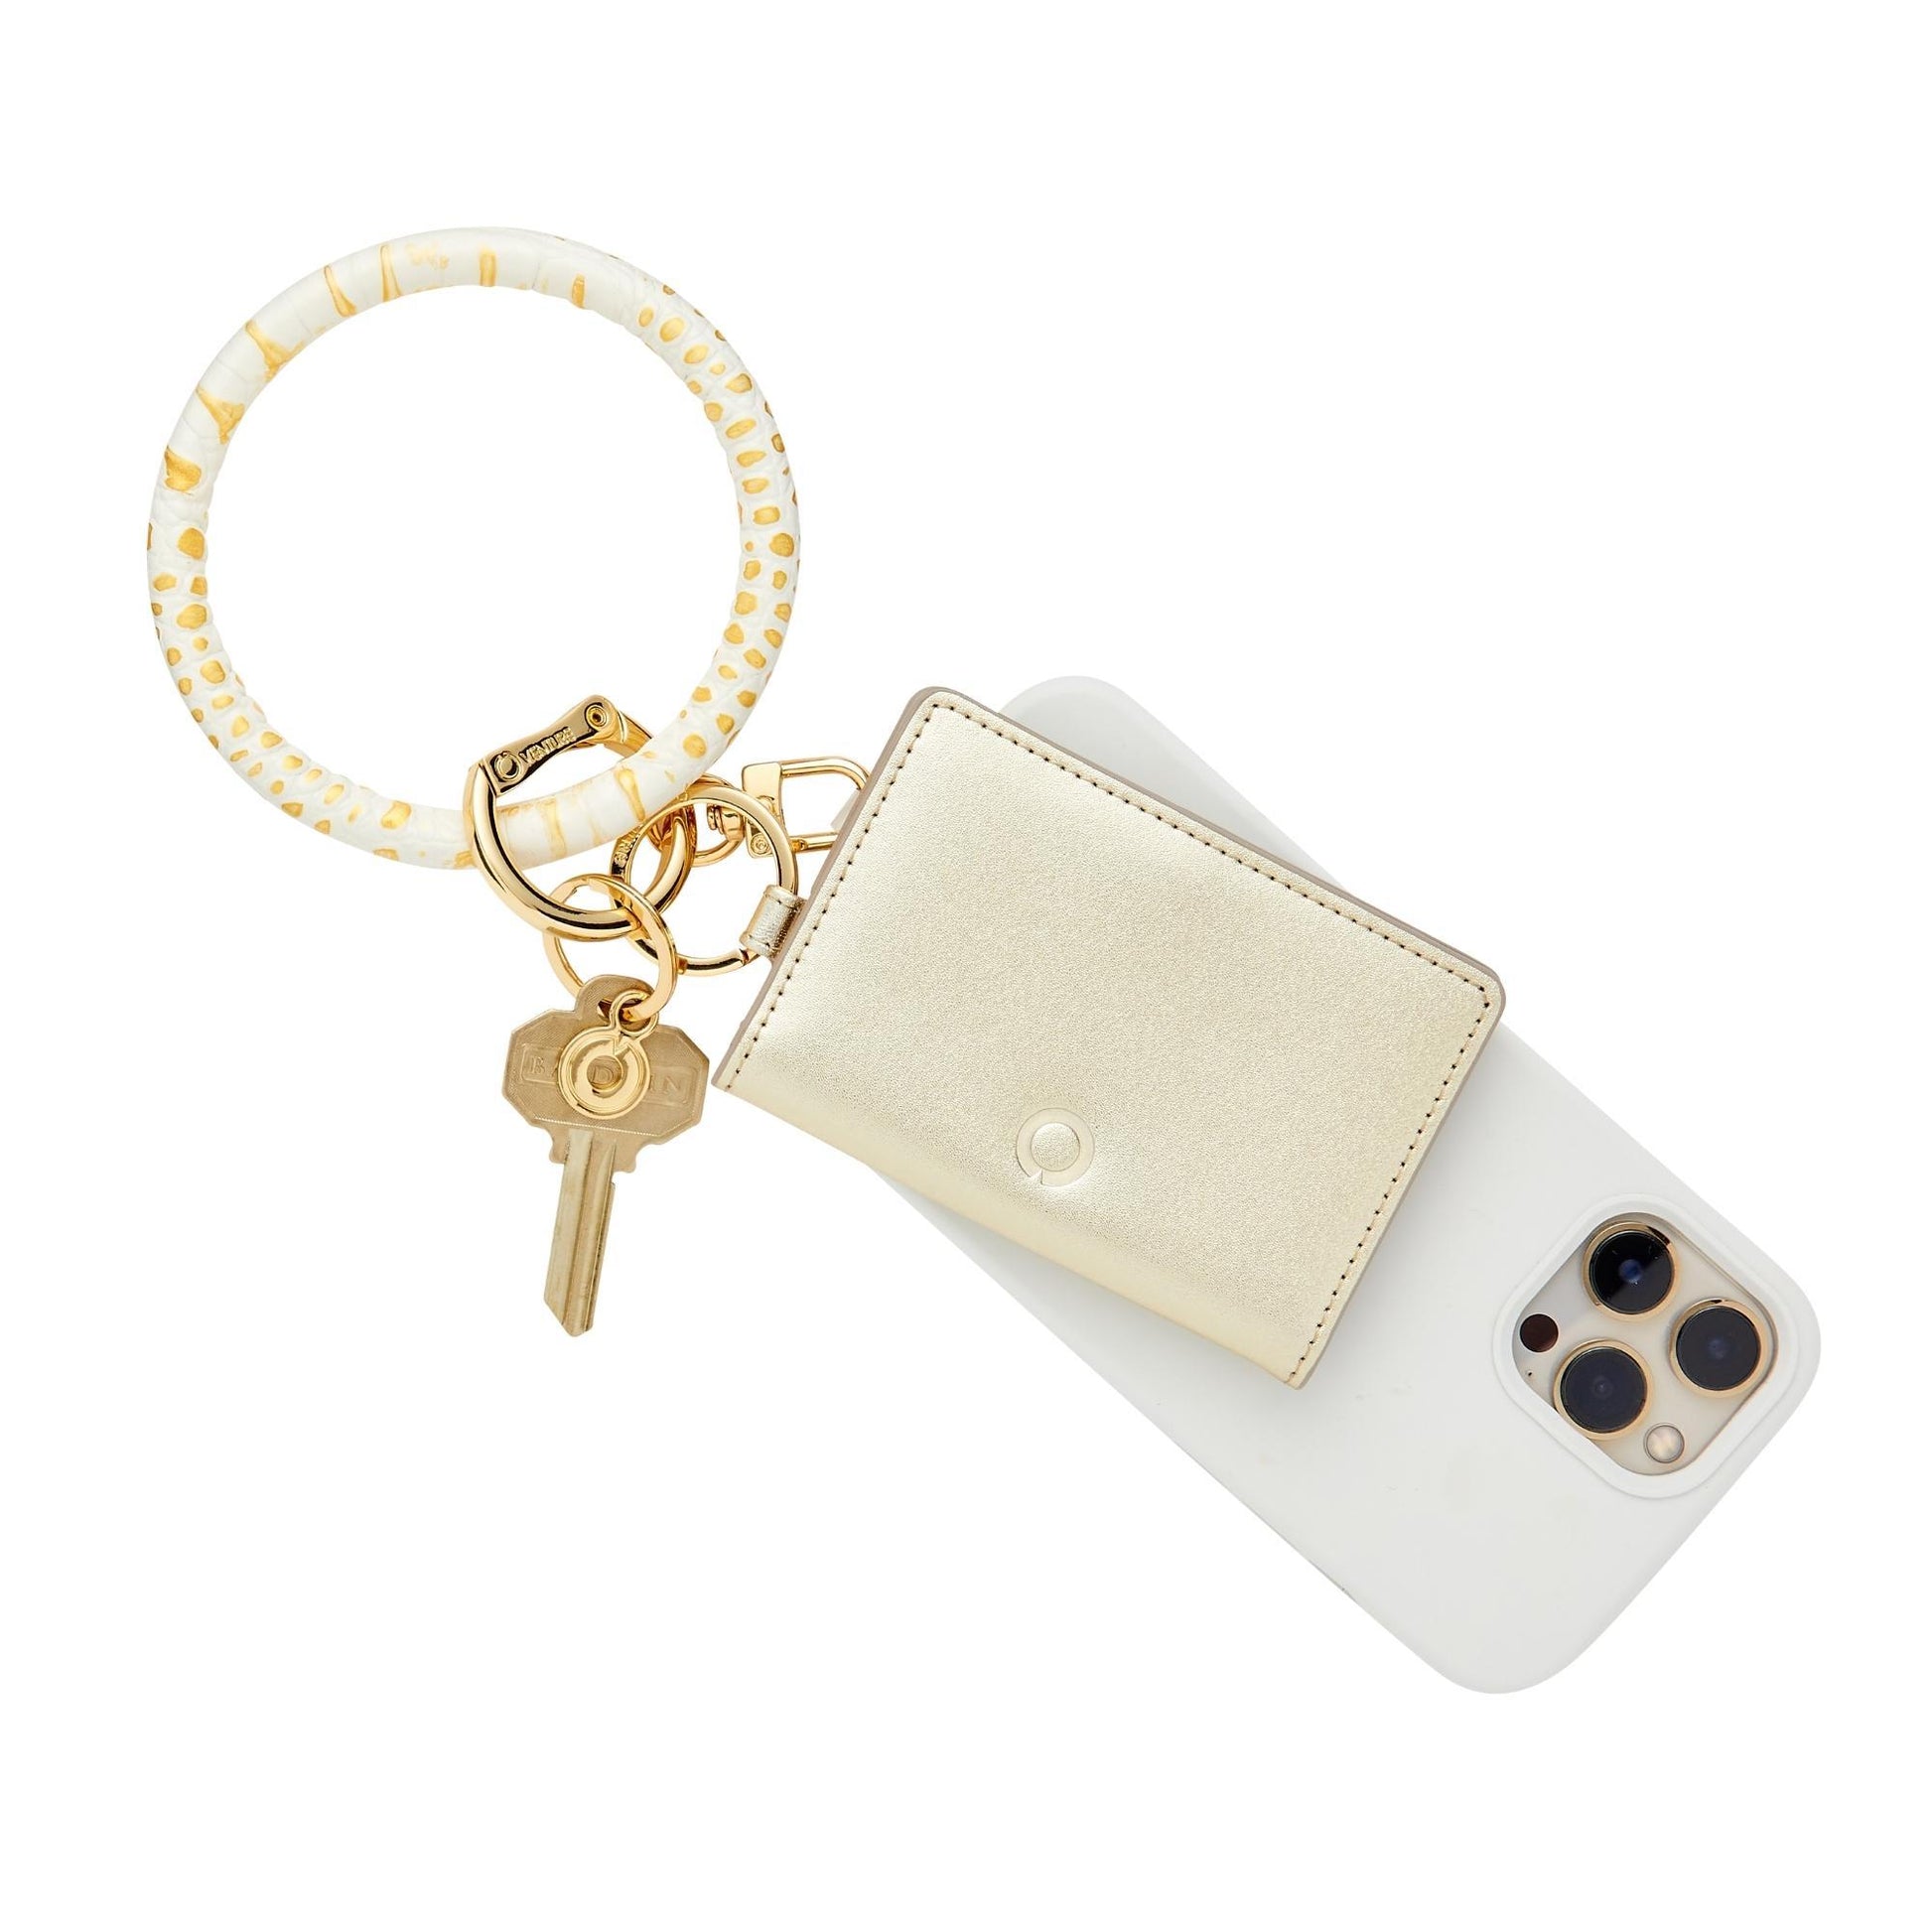 Stylish gold leather bifold keychain wallet accessory shown as a wallet wristlet.  The id case is attached to a bracelet keyring with a phone case.